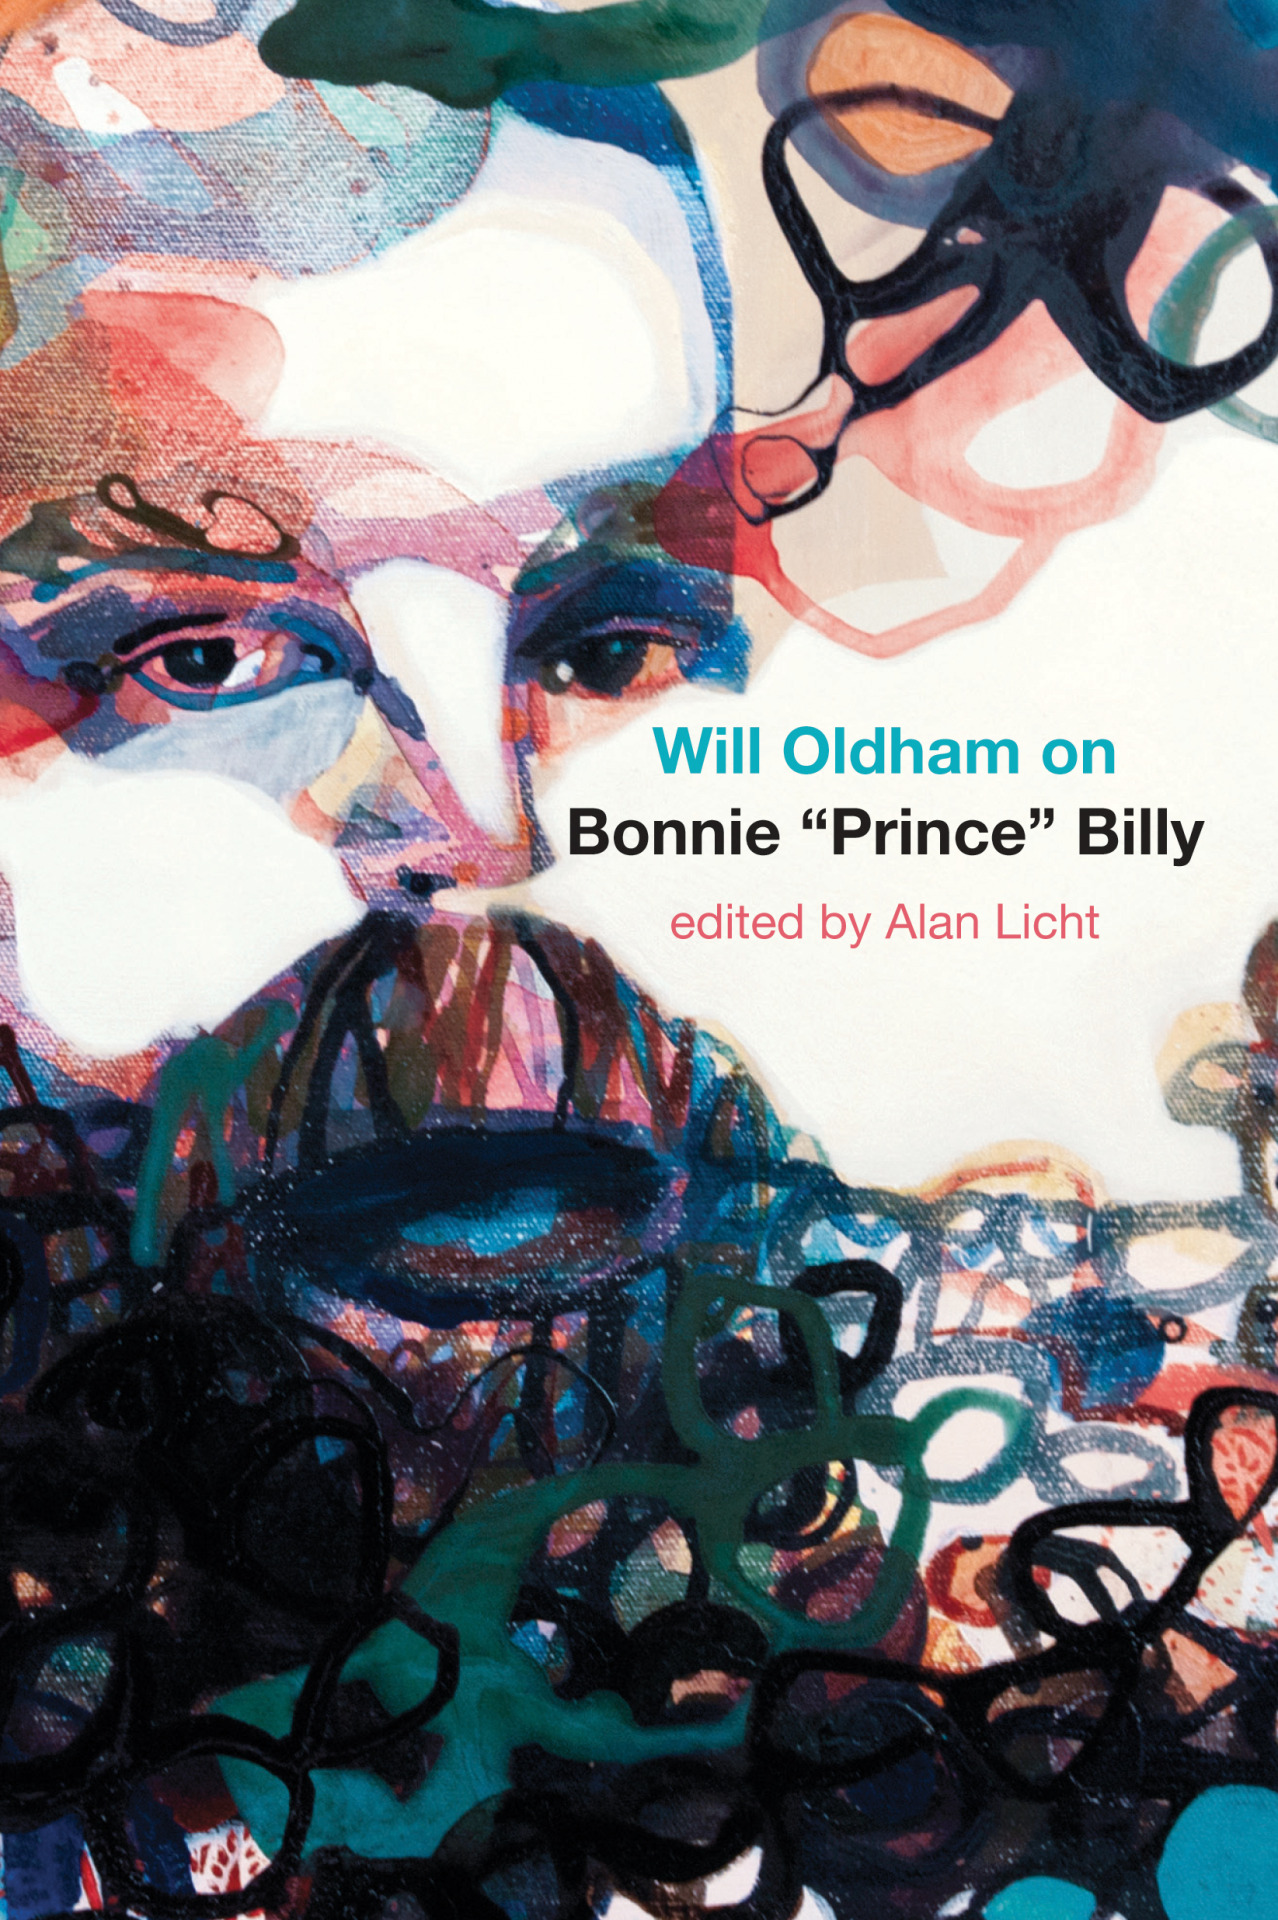 Will Oldham on Bonnie “Prince” Billy
A 350-page interview with Will Oldham about his work. How you feel about the book, of course, is dependent on how you feel about Will Oldham. I found a lot of his ideas about making art to be pretty in tune with...